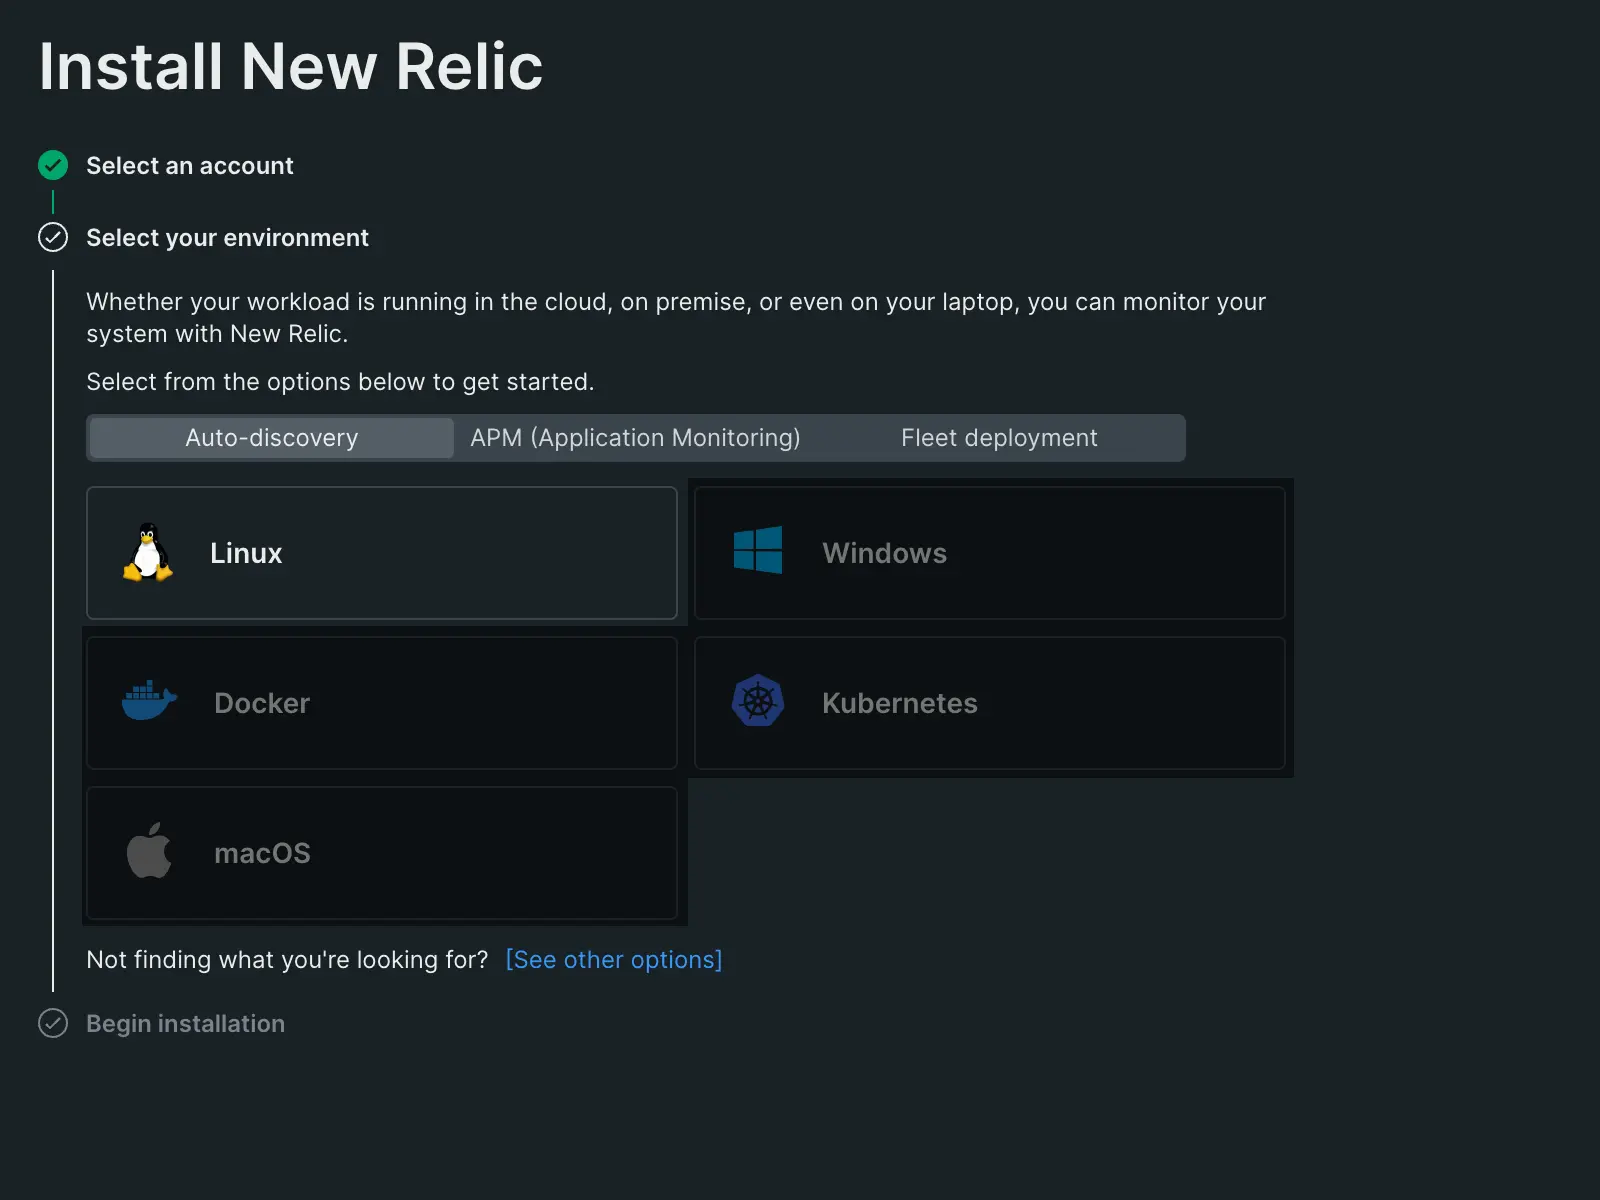 An image displaying New Relic's guided installation for Linux